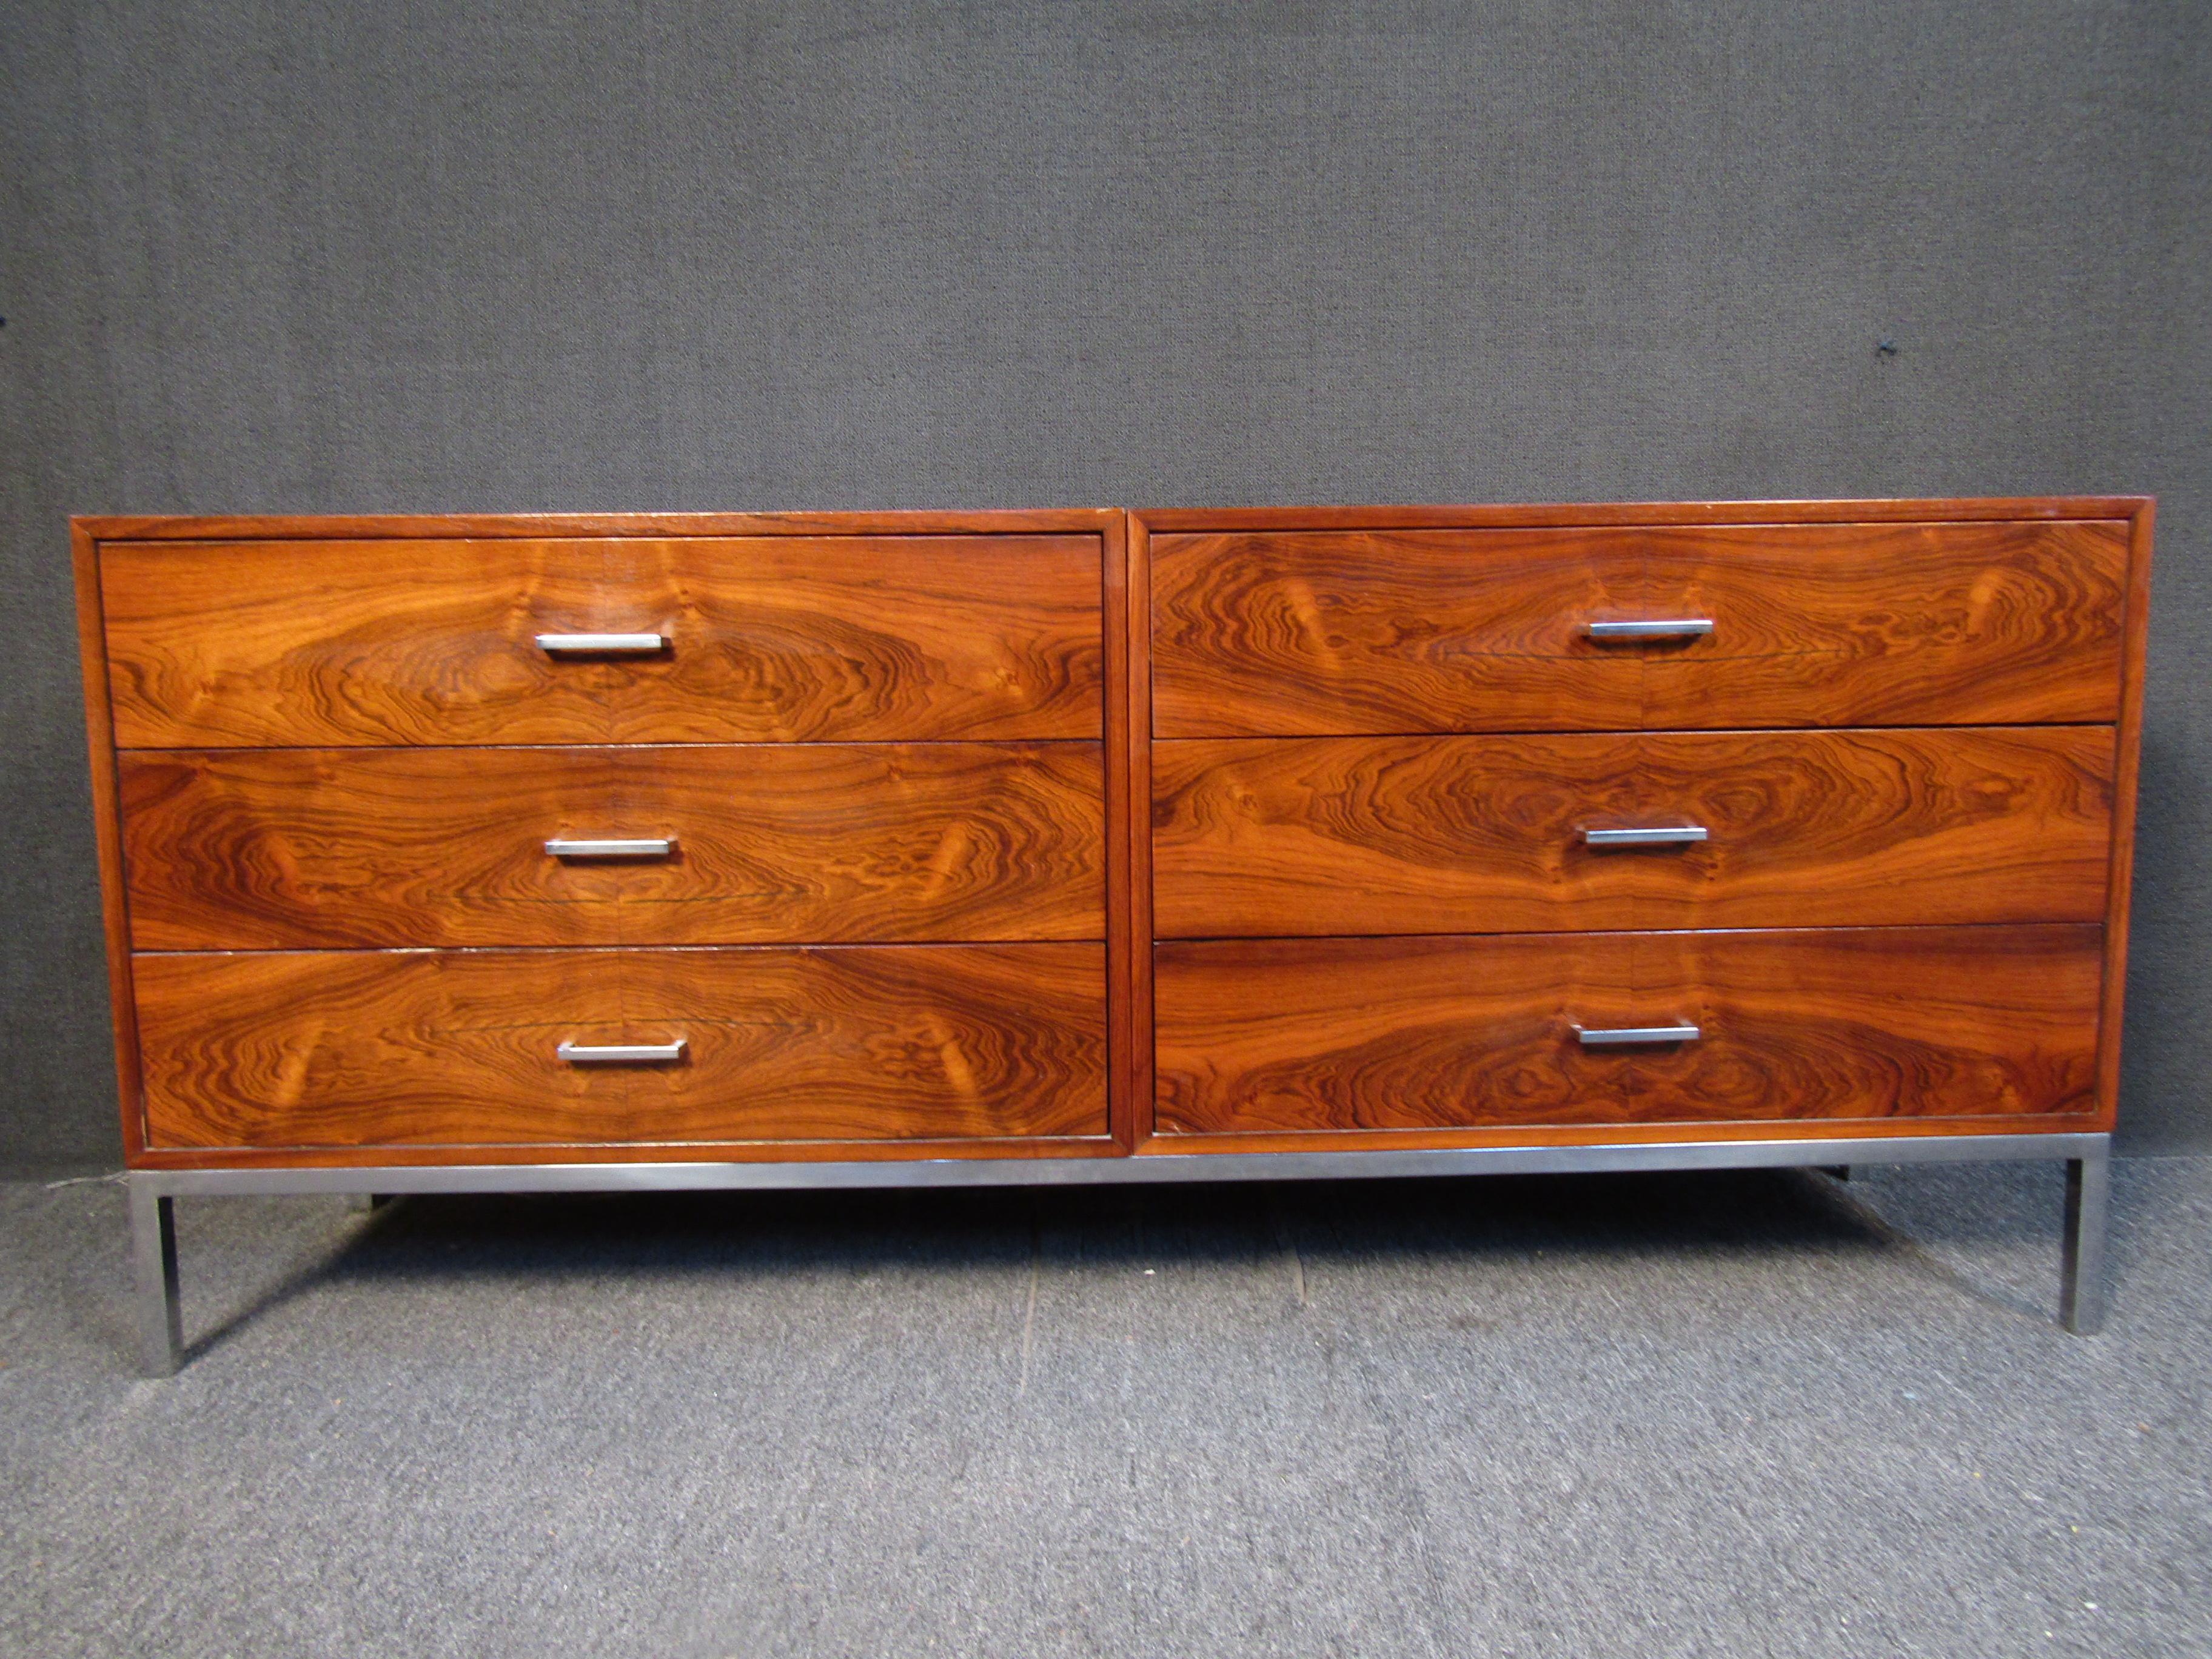 A stunning Mid-Century Modern Danish rosewood credenza. A classic dresser with (6) drawers for optimum storage. A sleek design perfect for any home, office or bedroom setting. Please confirm item location with seller (NY/NJ).